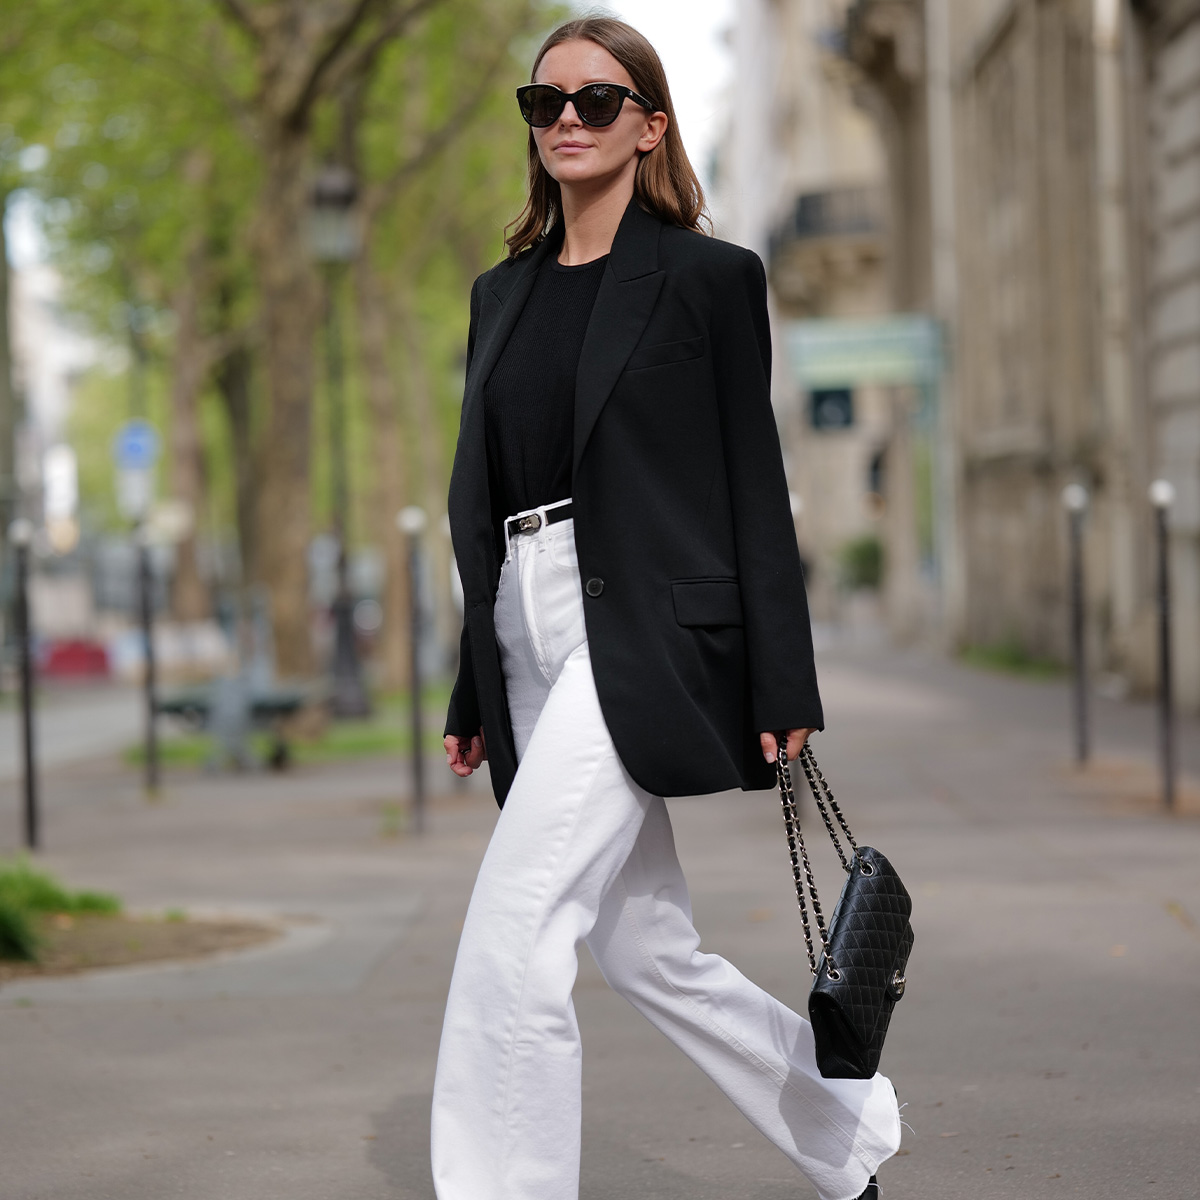 How To Wear The Flare Jeans Trends: 11 Chic Outfit Ideas